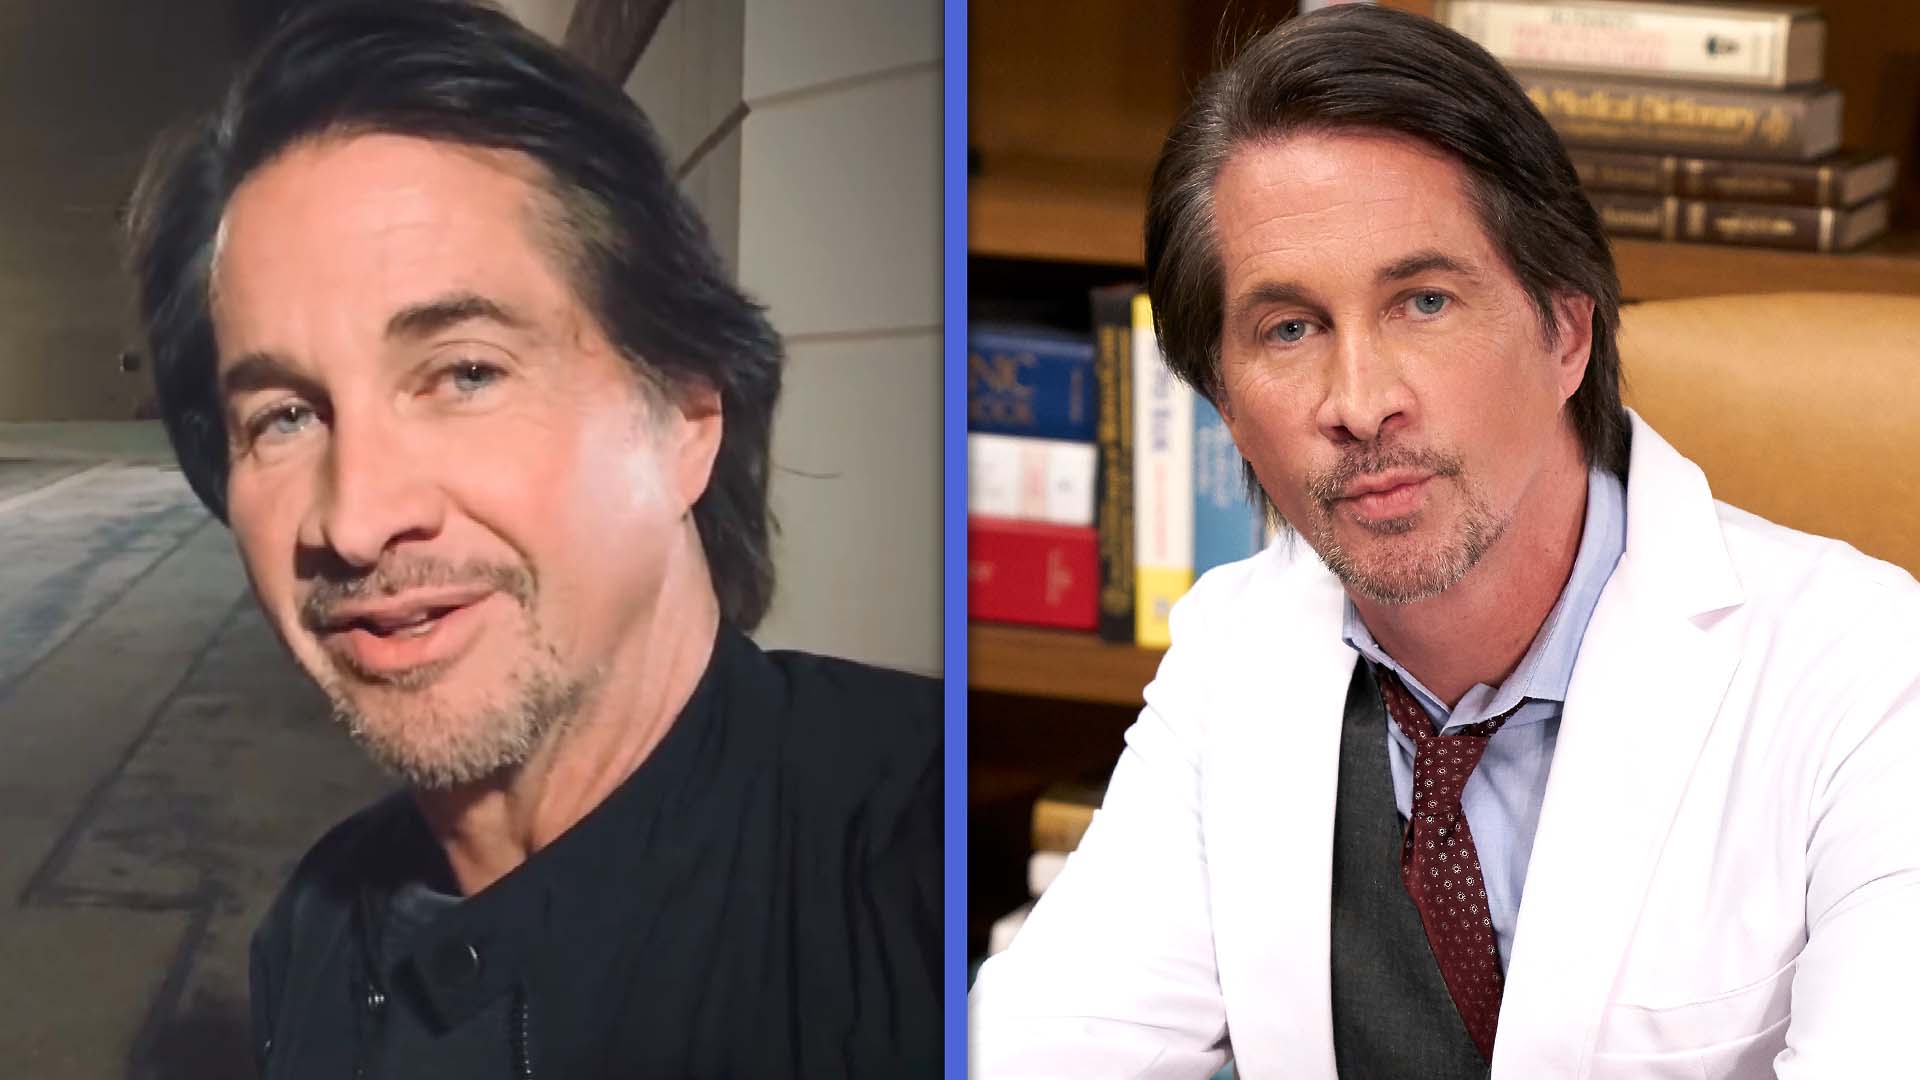 General Hospital's Michael Easton EXITS After 10 Years as John McBain